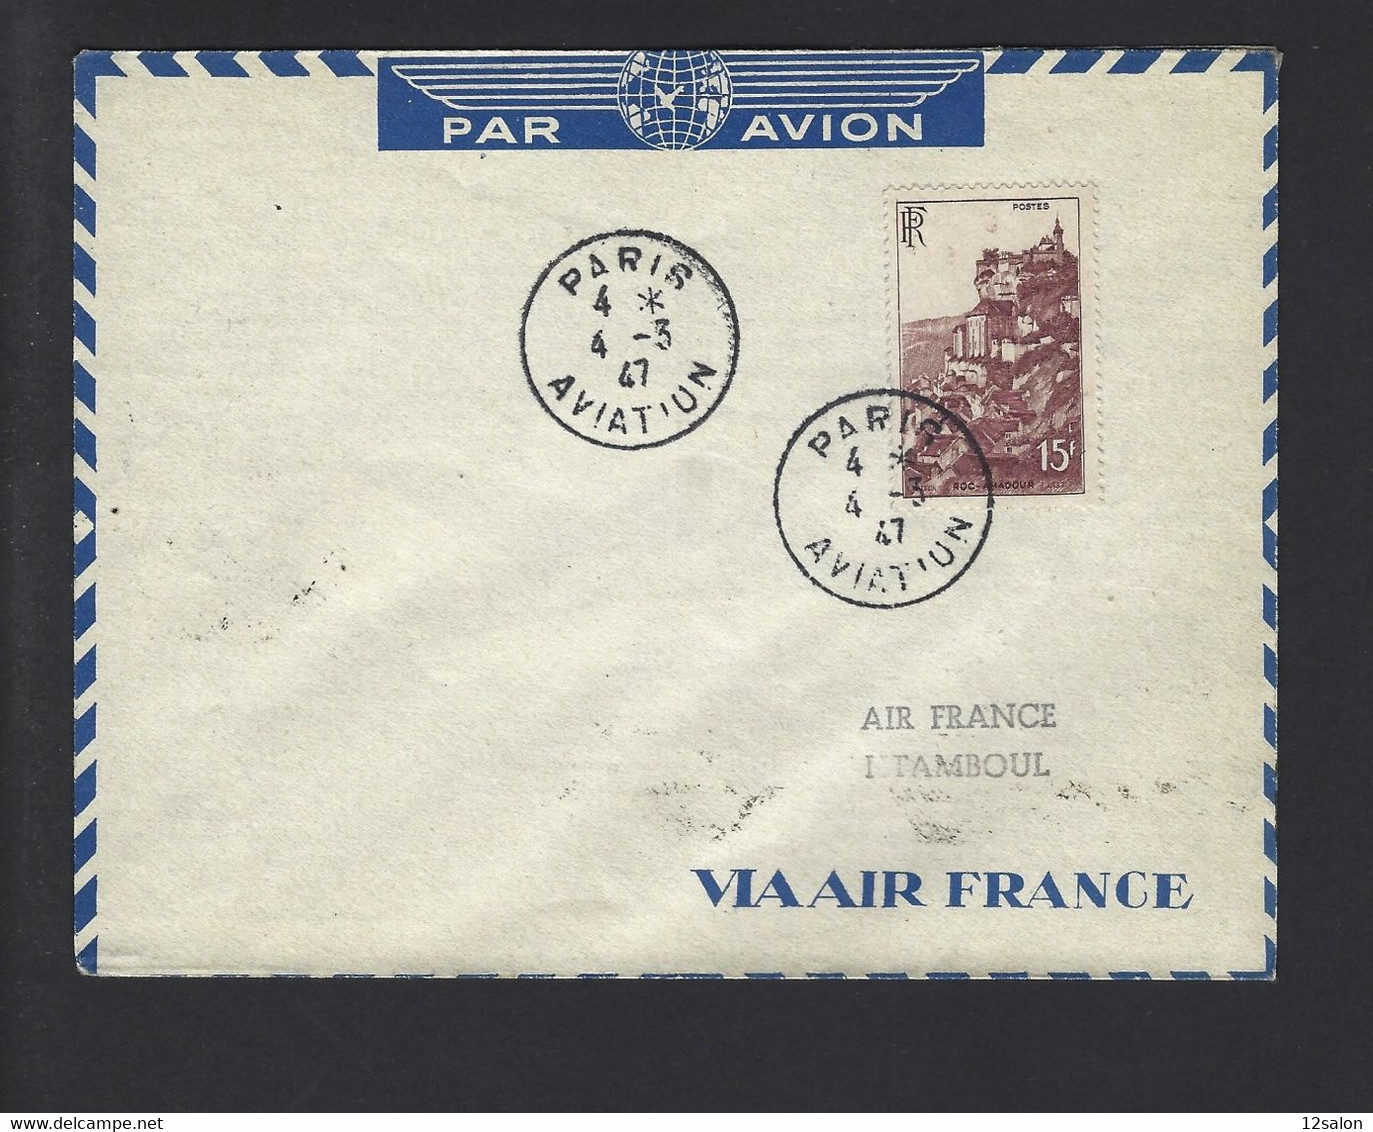 FRANCE PARS AVIATION ISTANBOUL 1947 - Airplanes